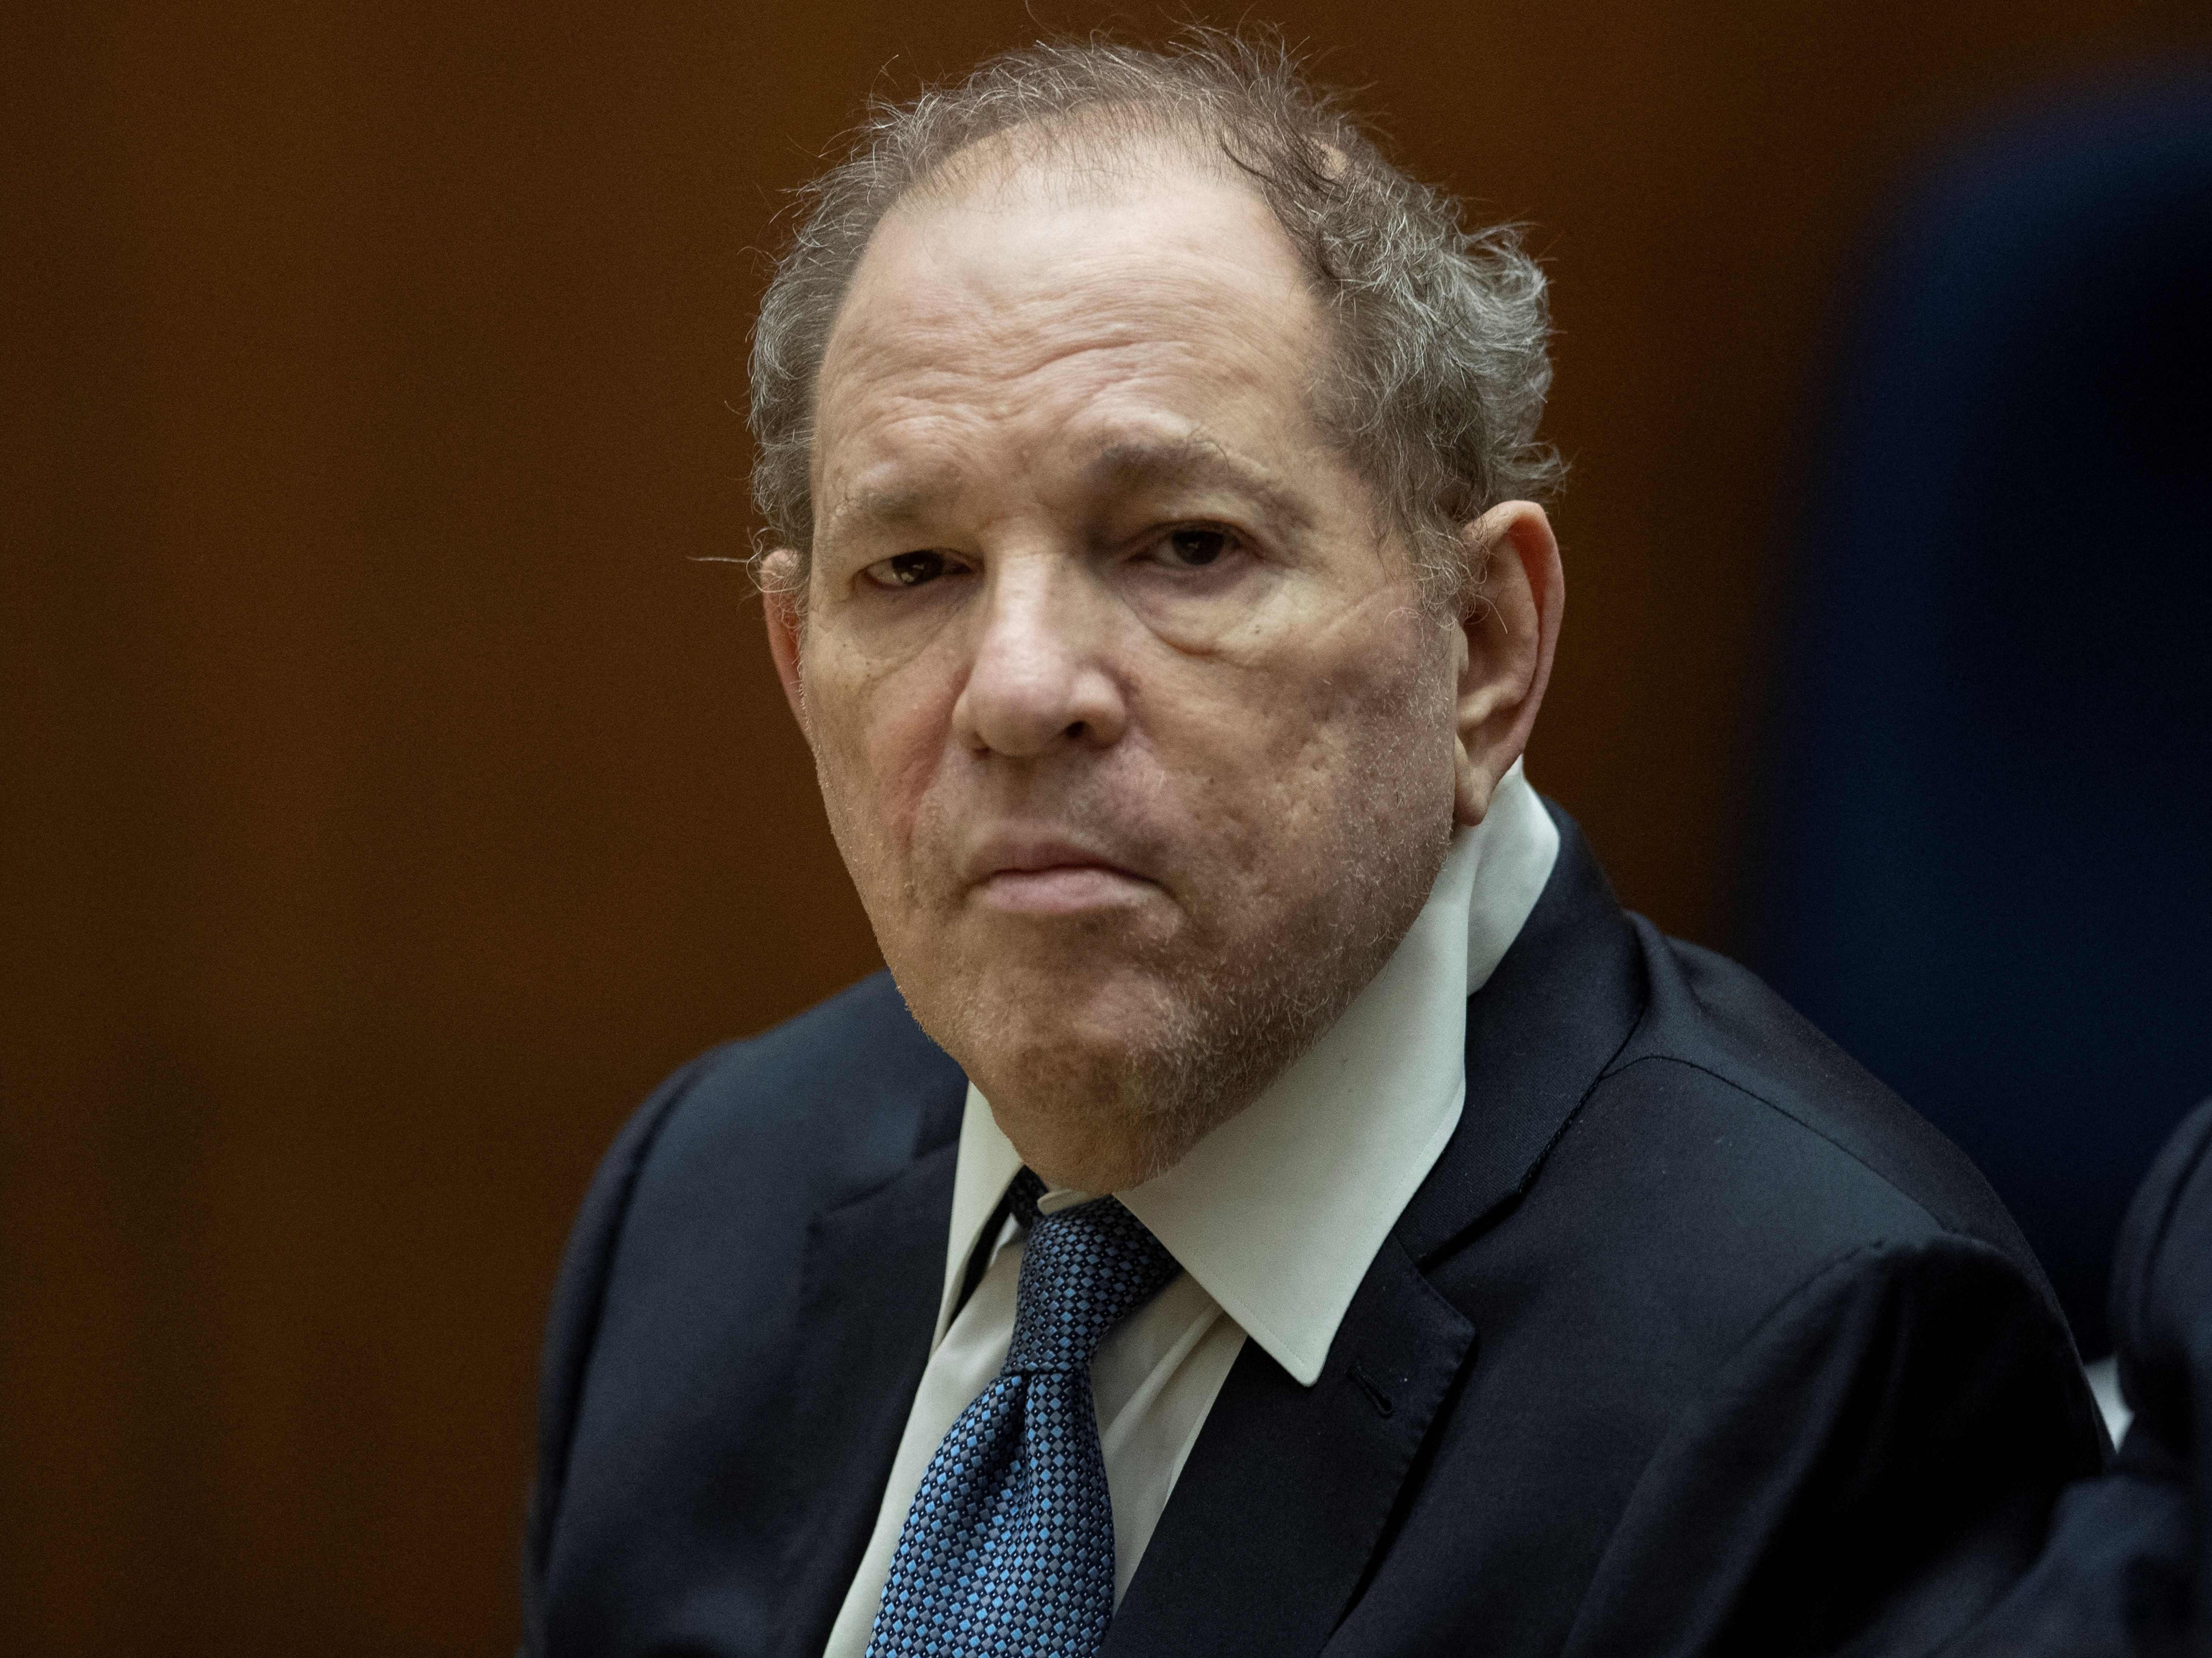 Harvey Weinstein at a hearing at the Clara Shortridge Foltz Criminal Justice Center in Los Angeles, California, on 4 October 2022